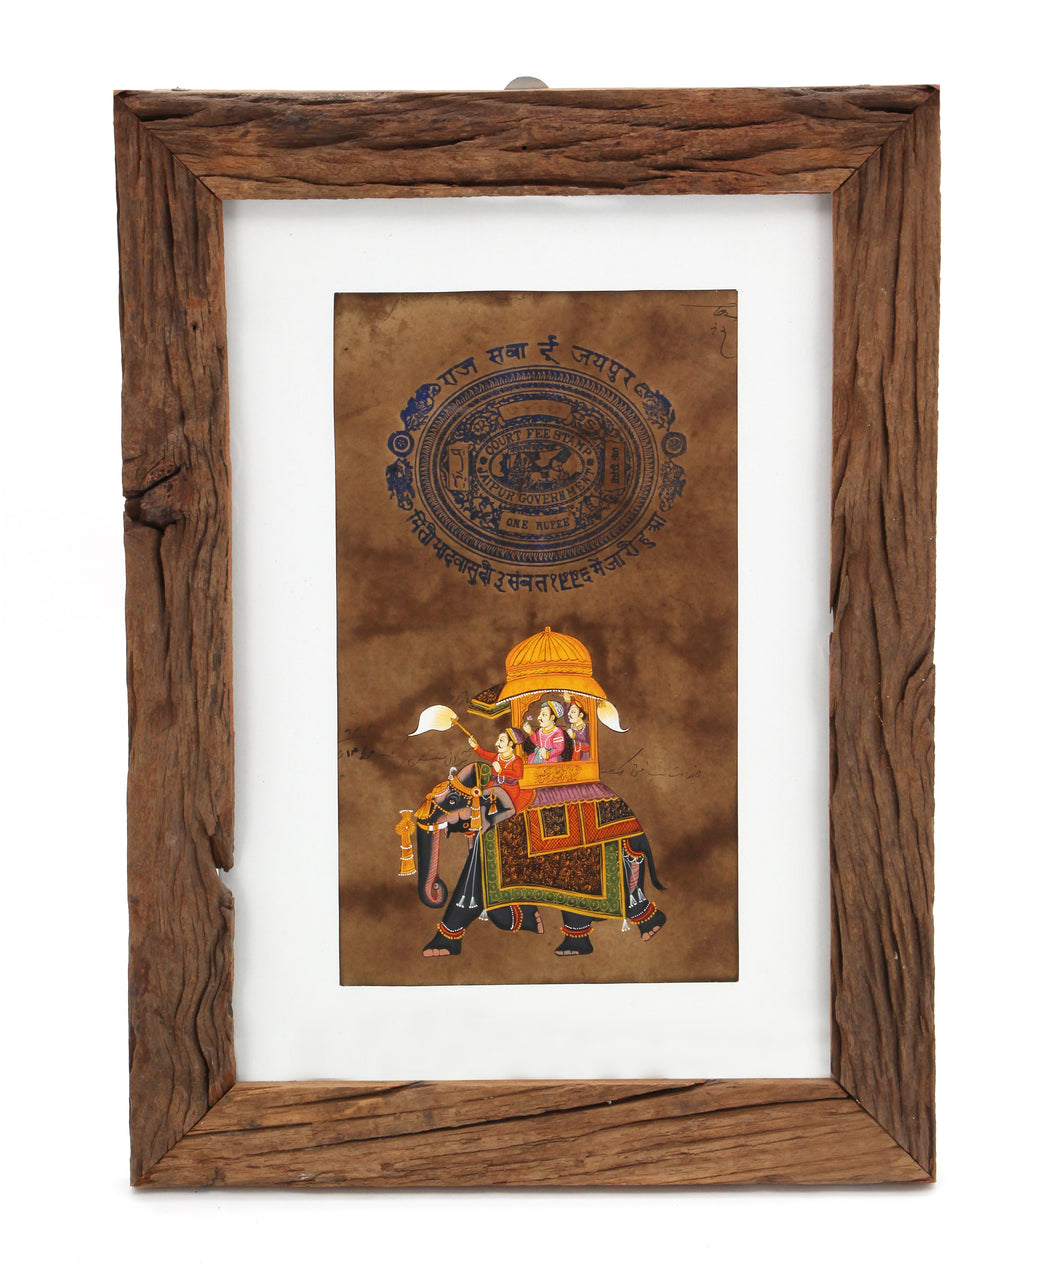 The Home Miniature Stamp Painting Frame